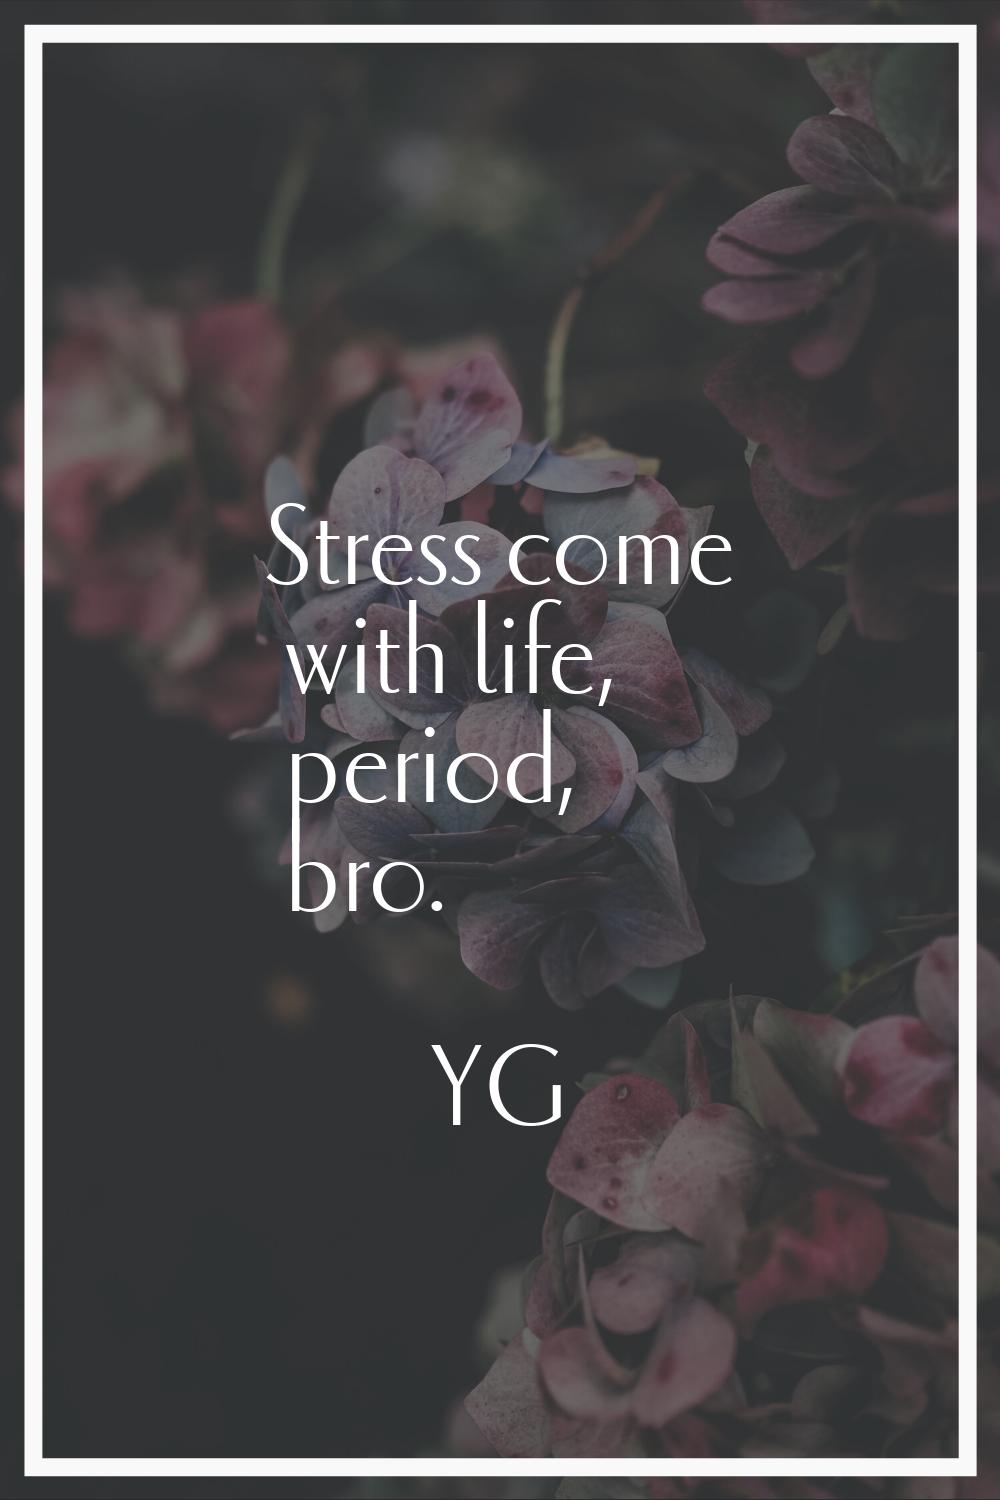 Stress come with life, period, bro.